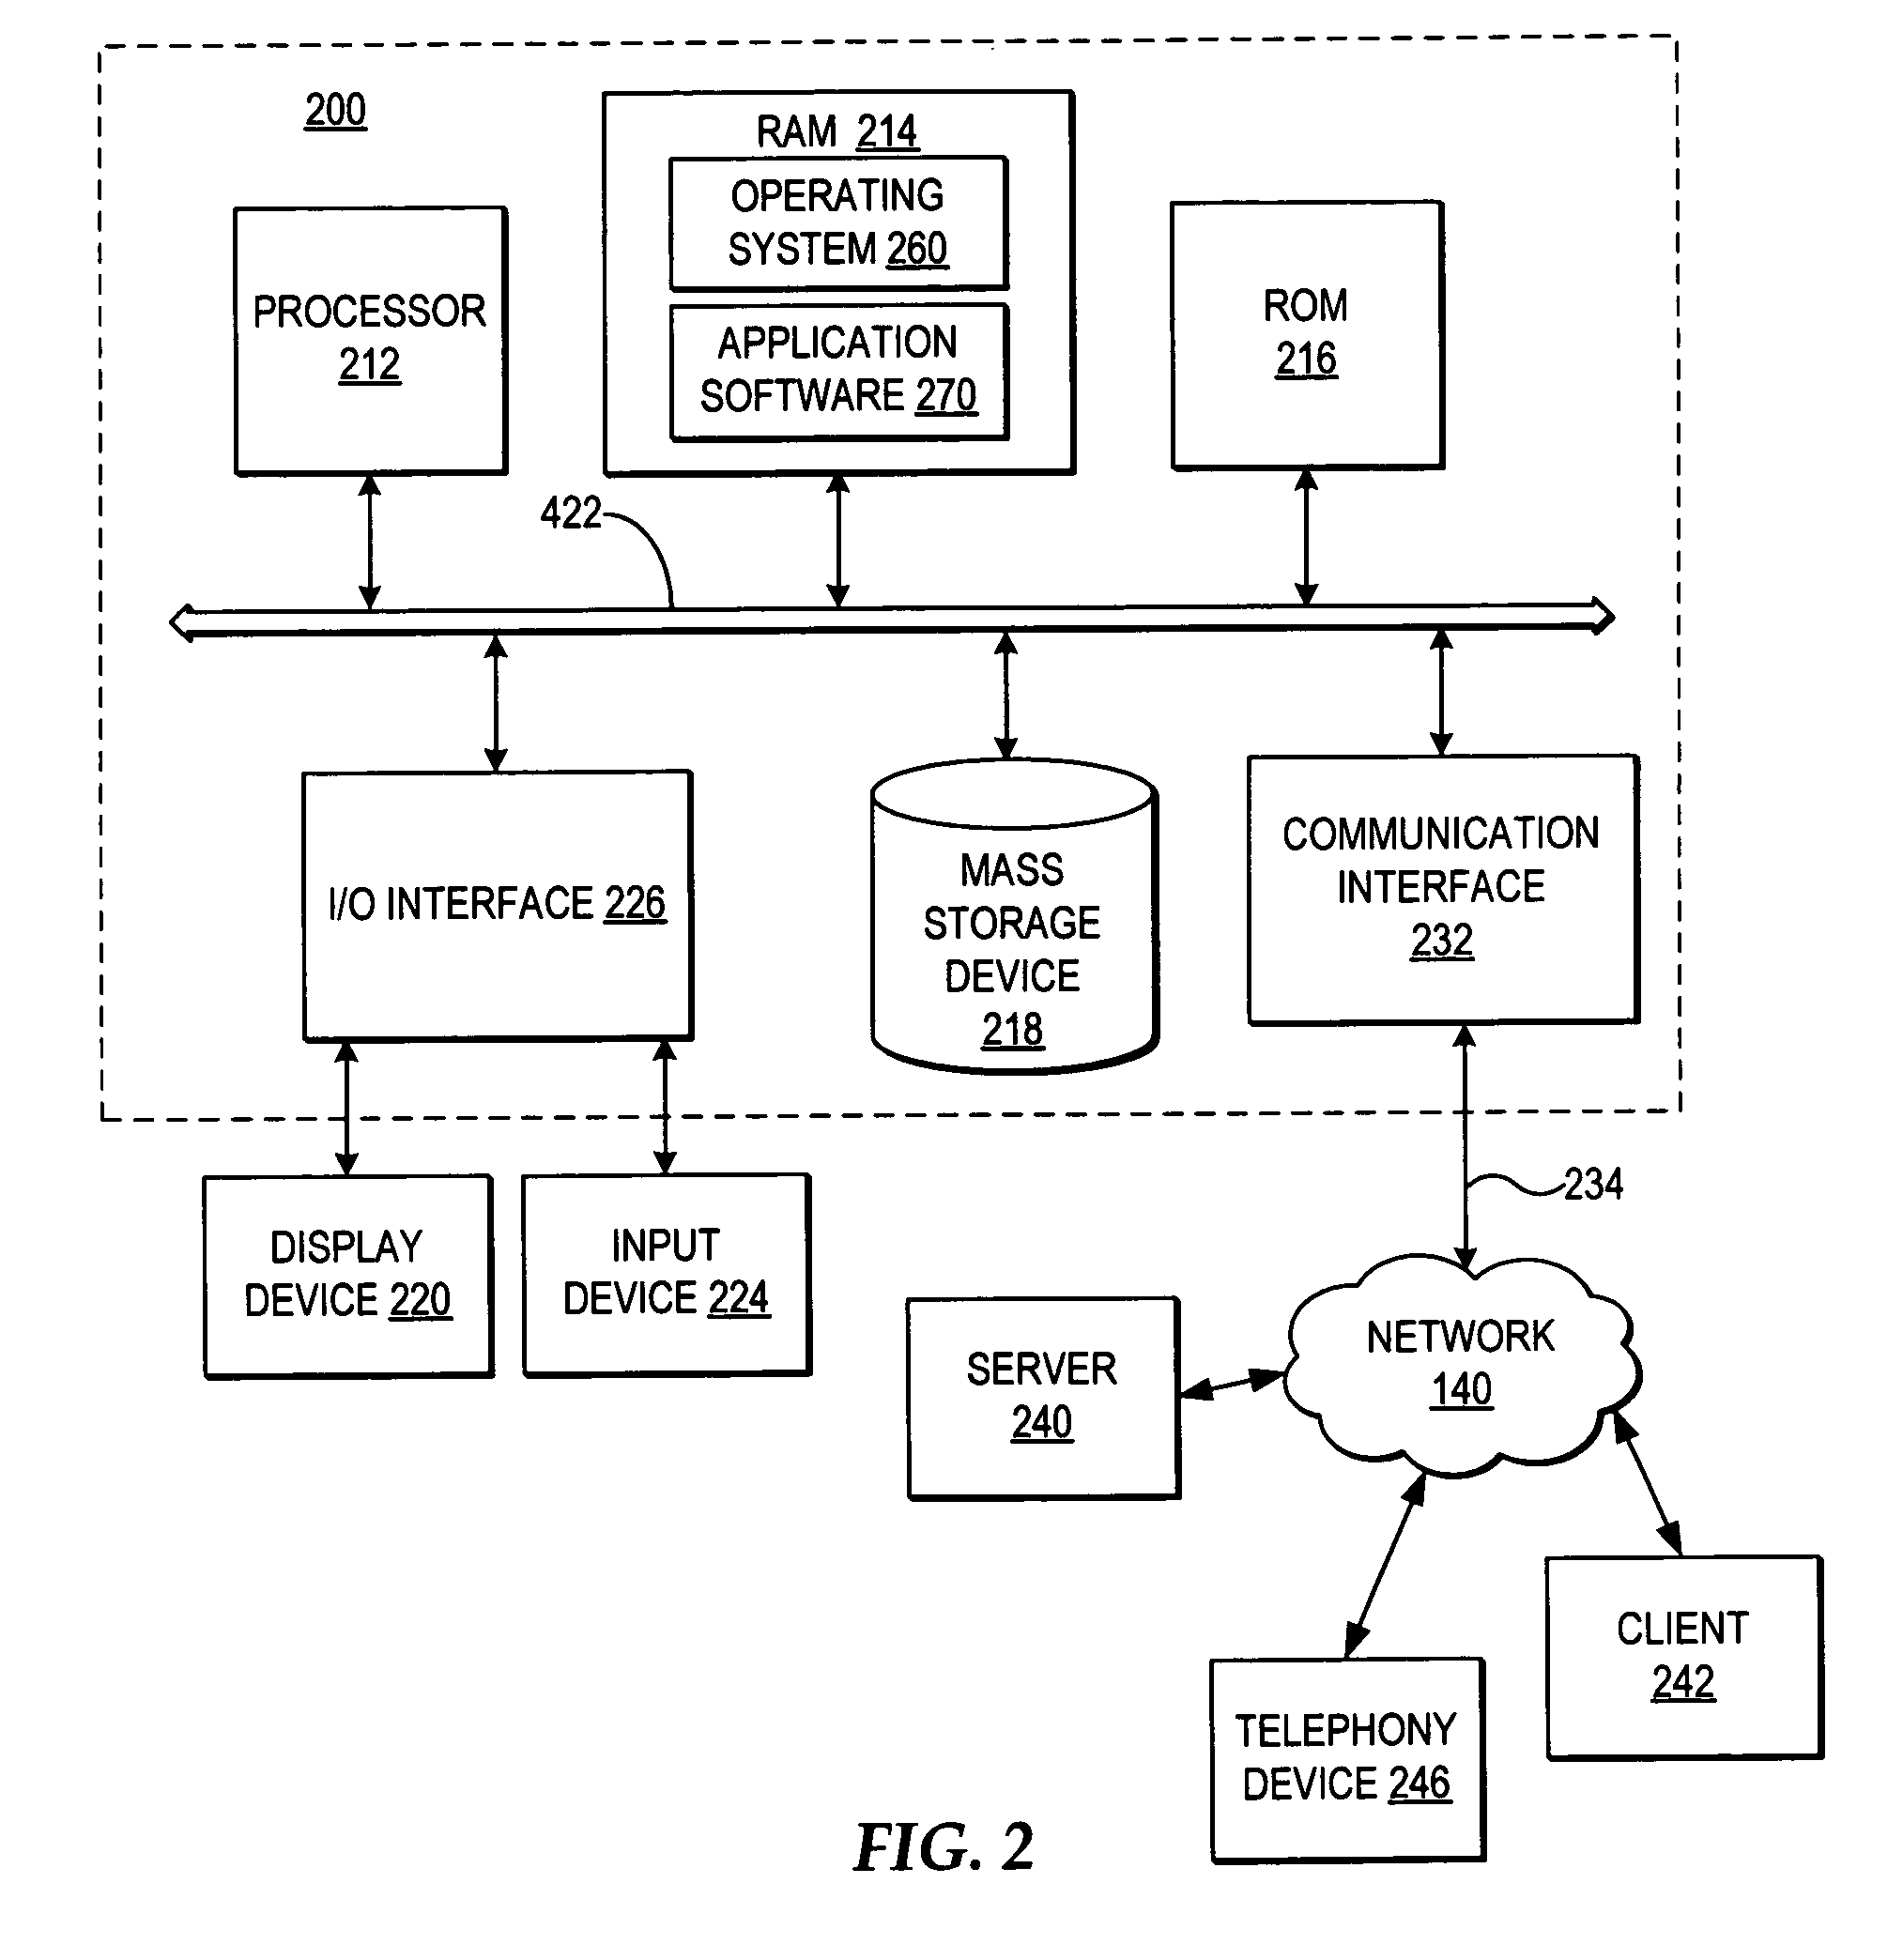 Hands free contact database information entry at a communication device